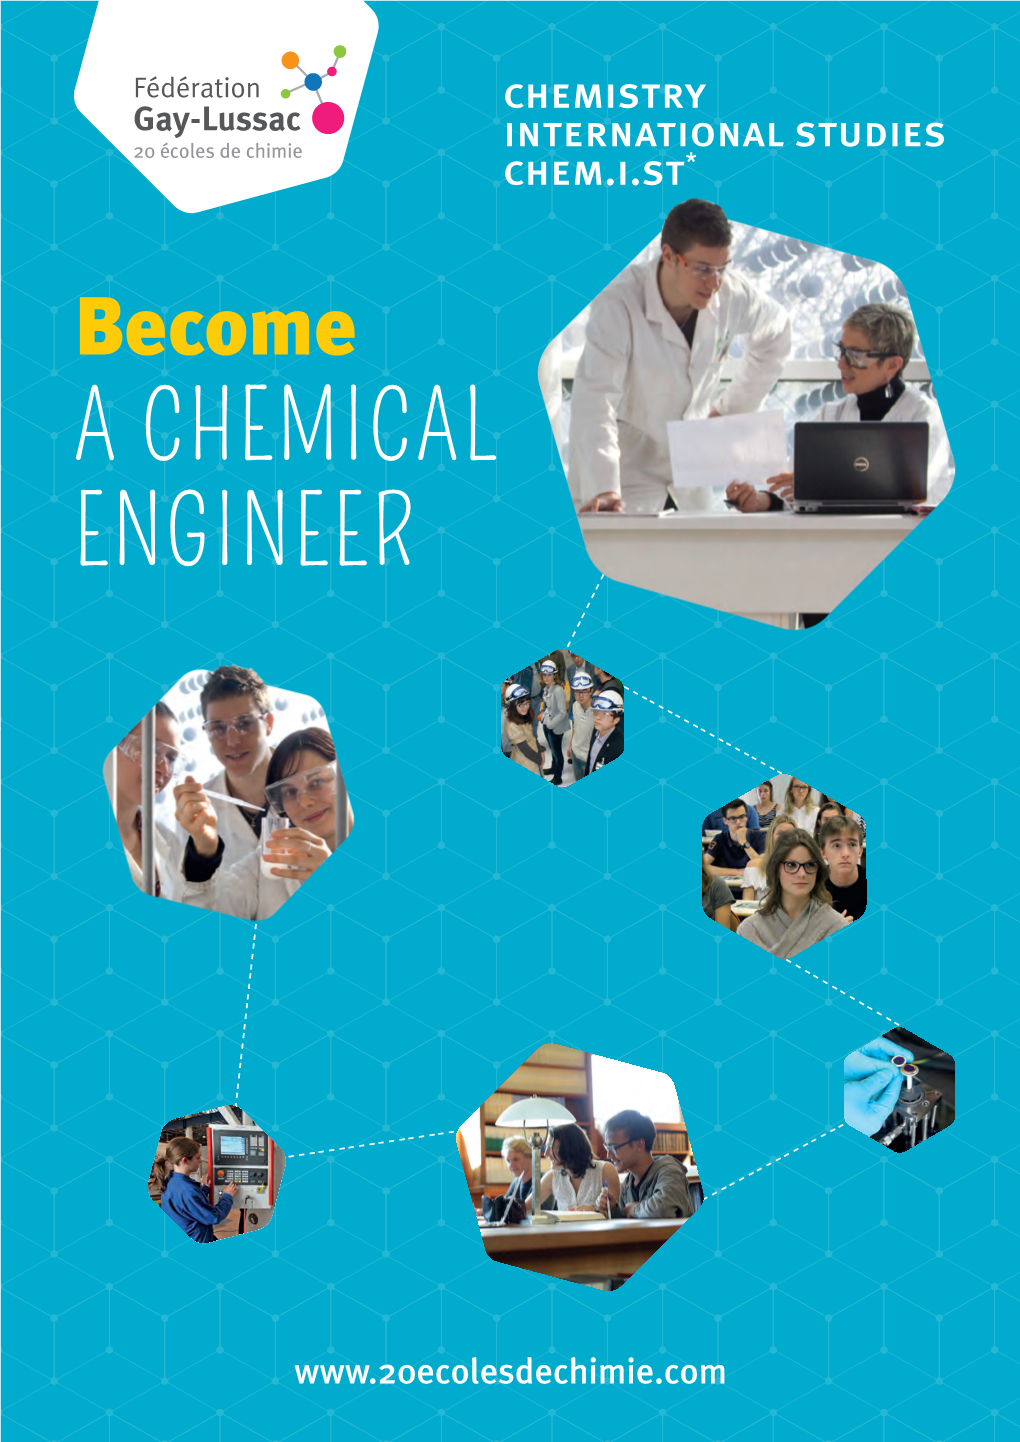 A Chemical Engineer